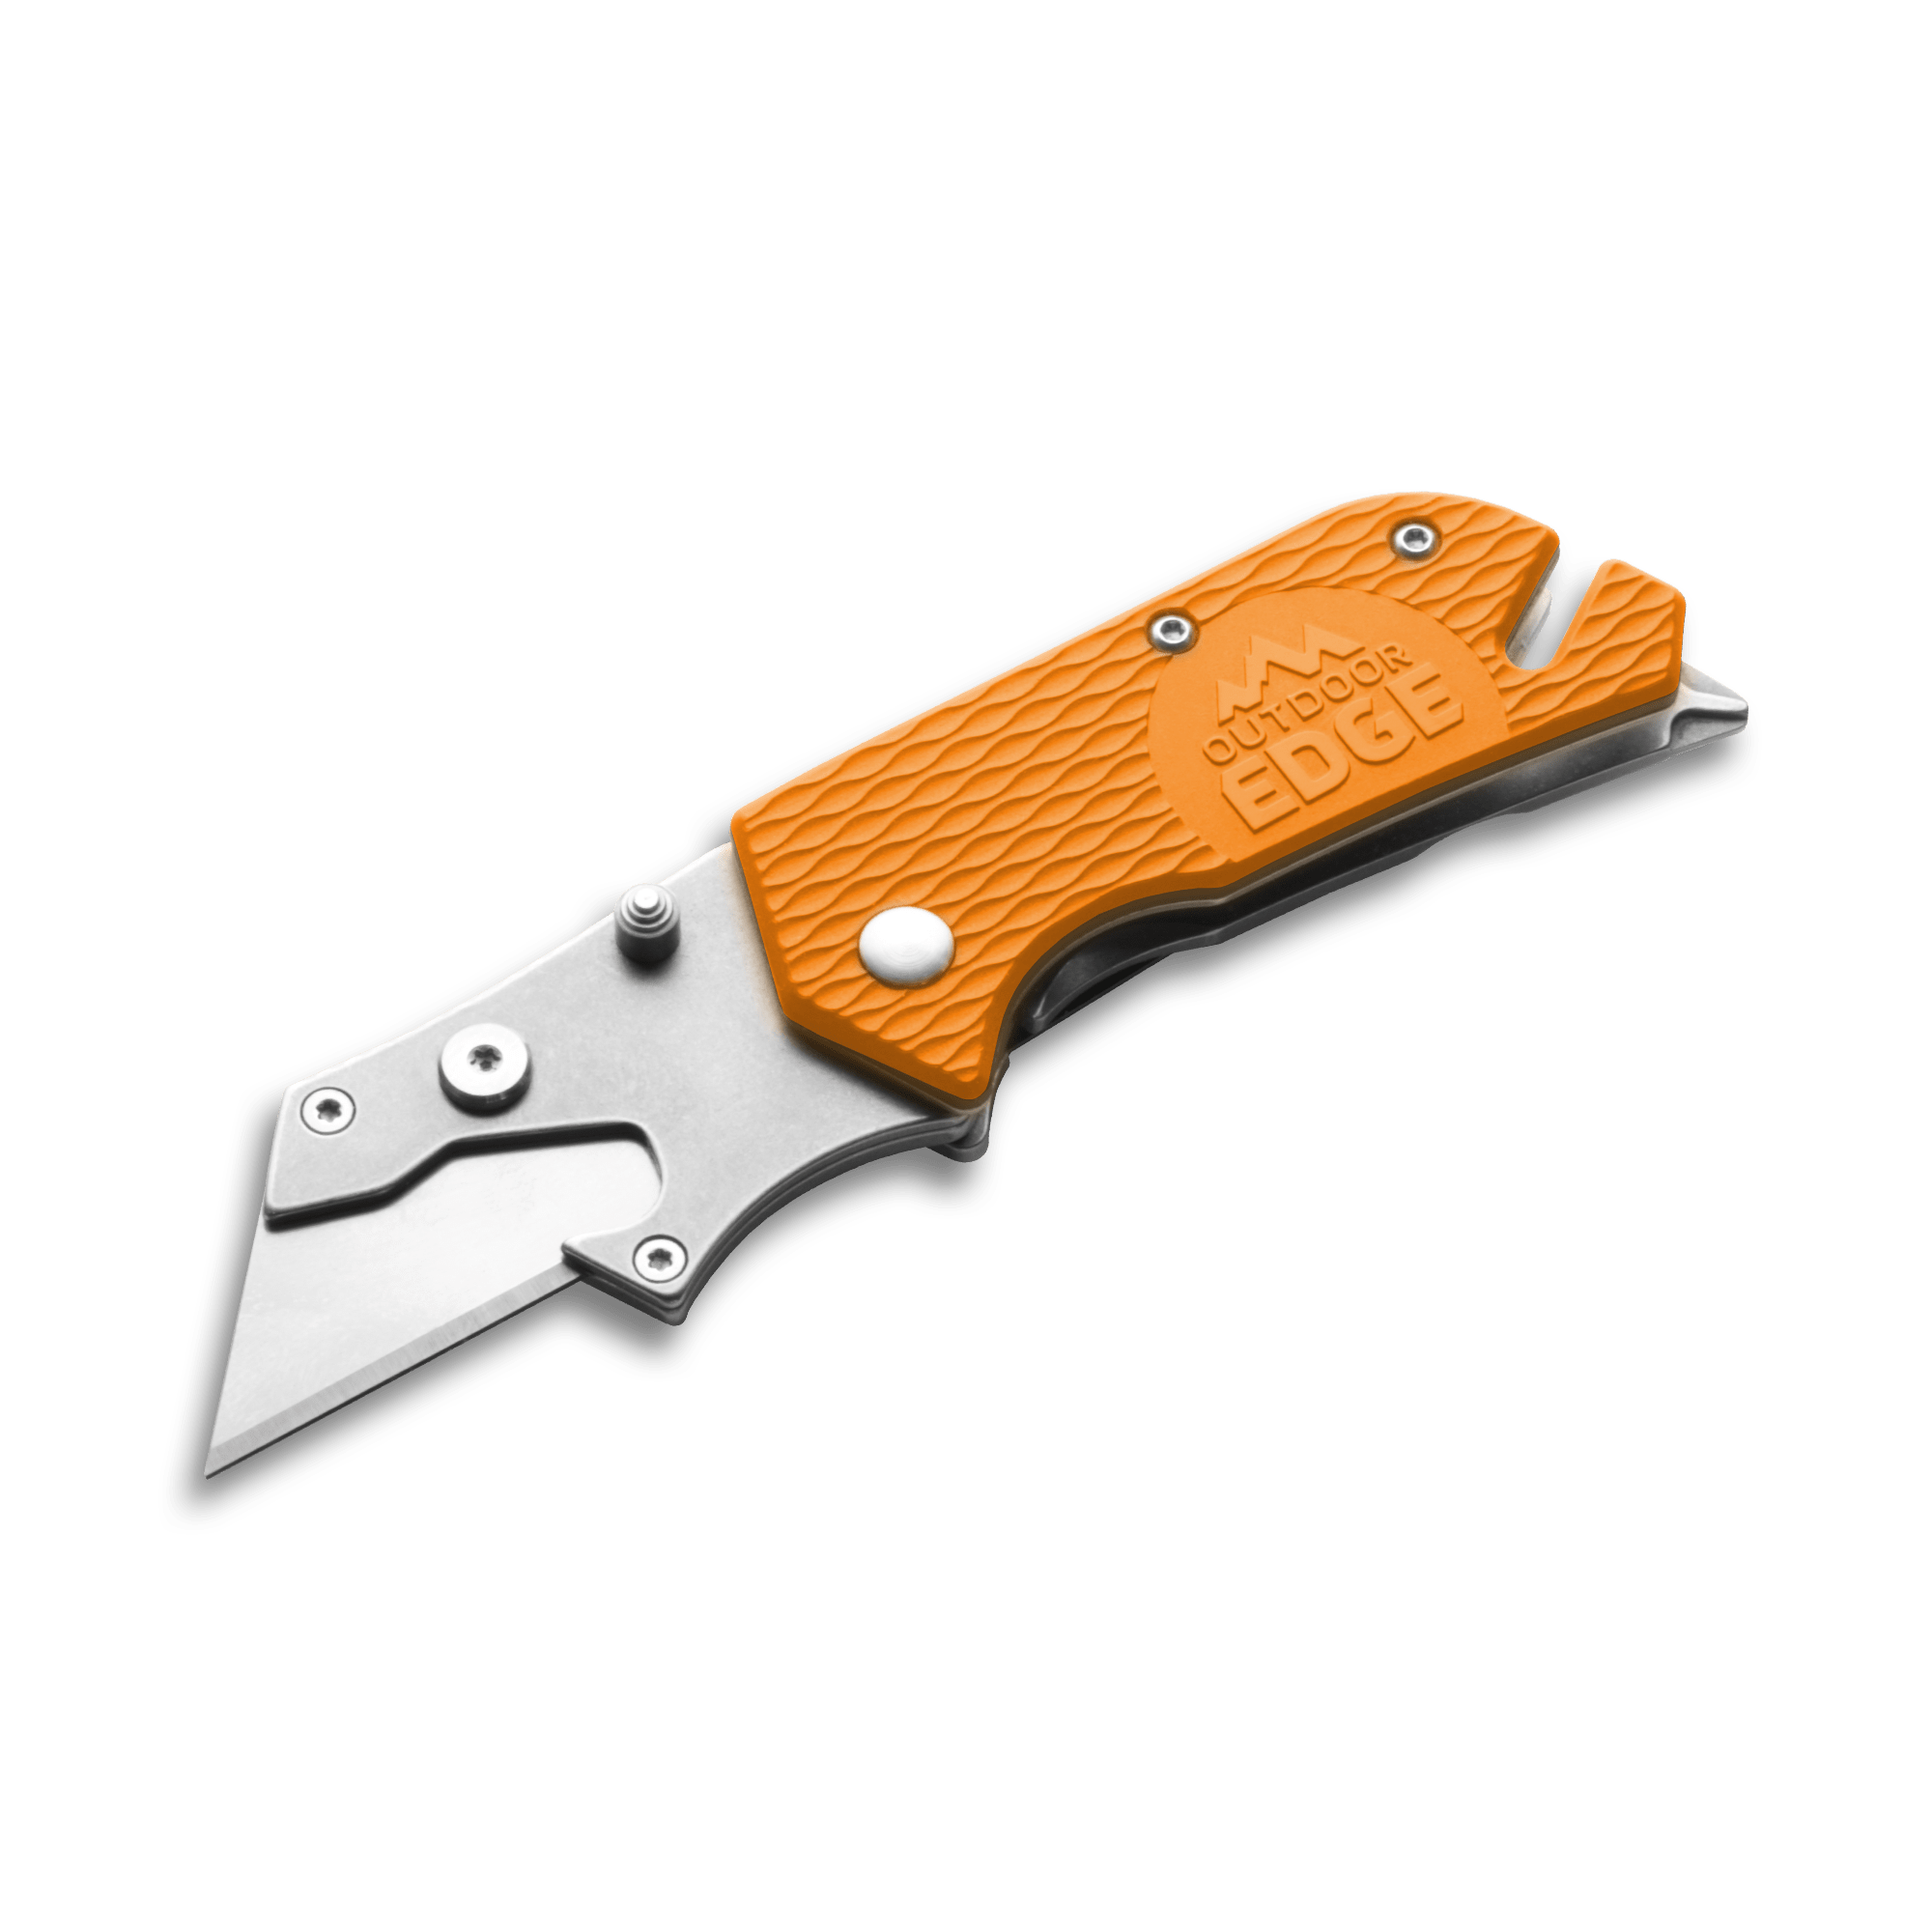 Tool Tuesday - 2C Cutter Knife 